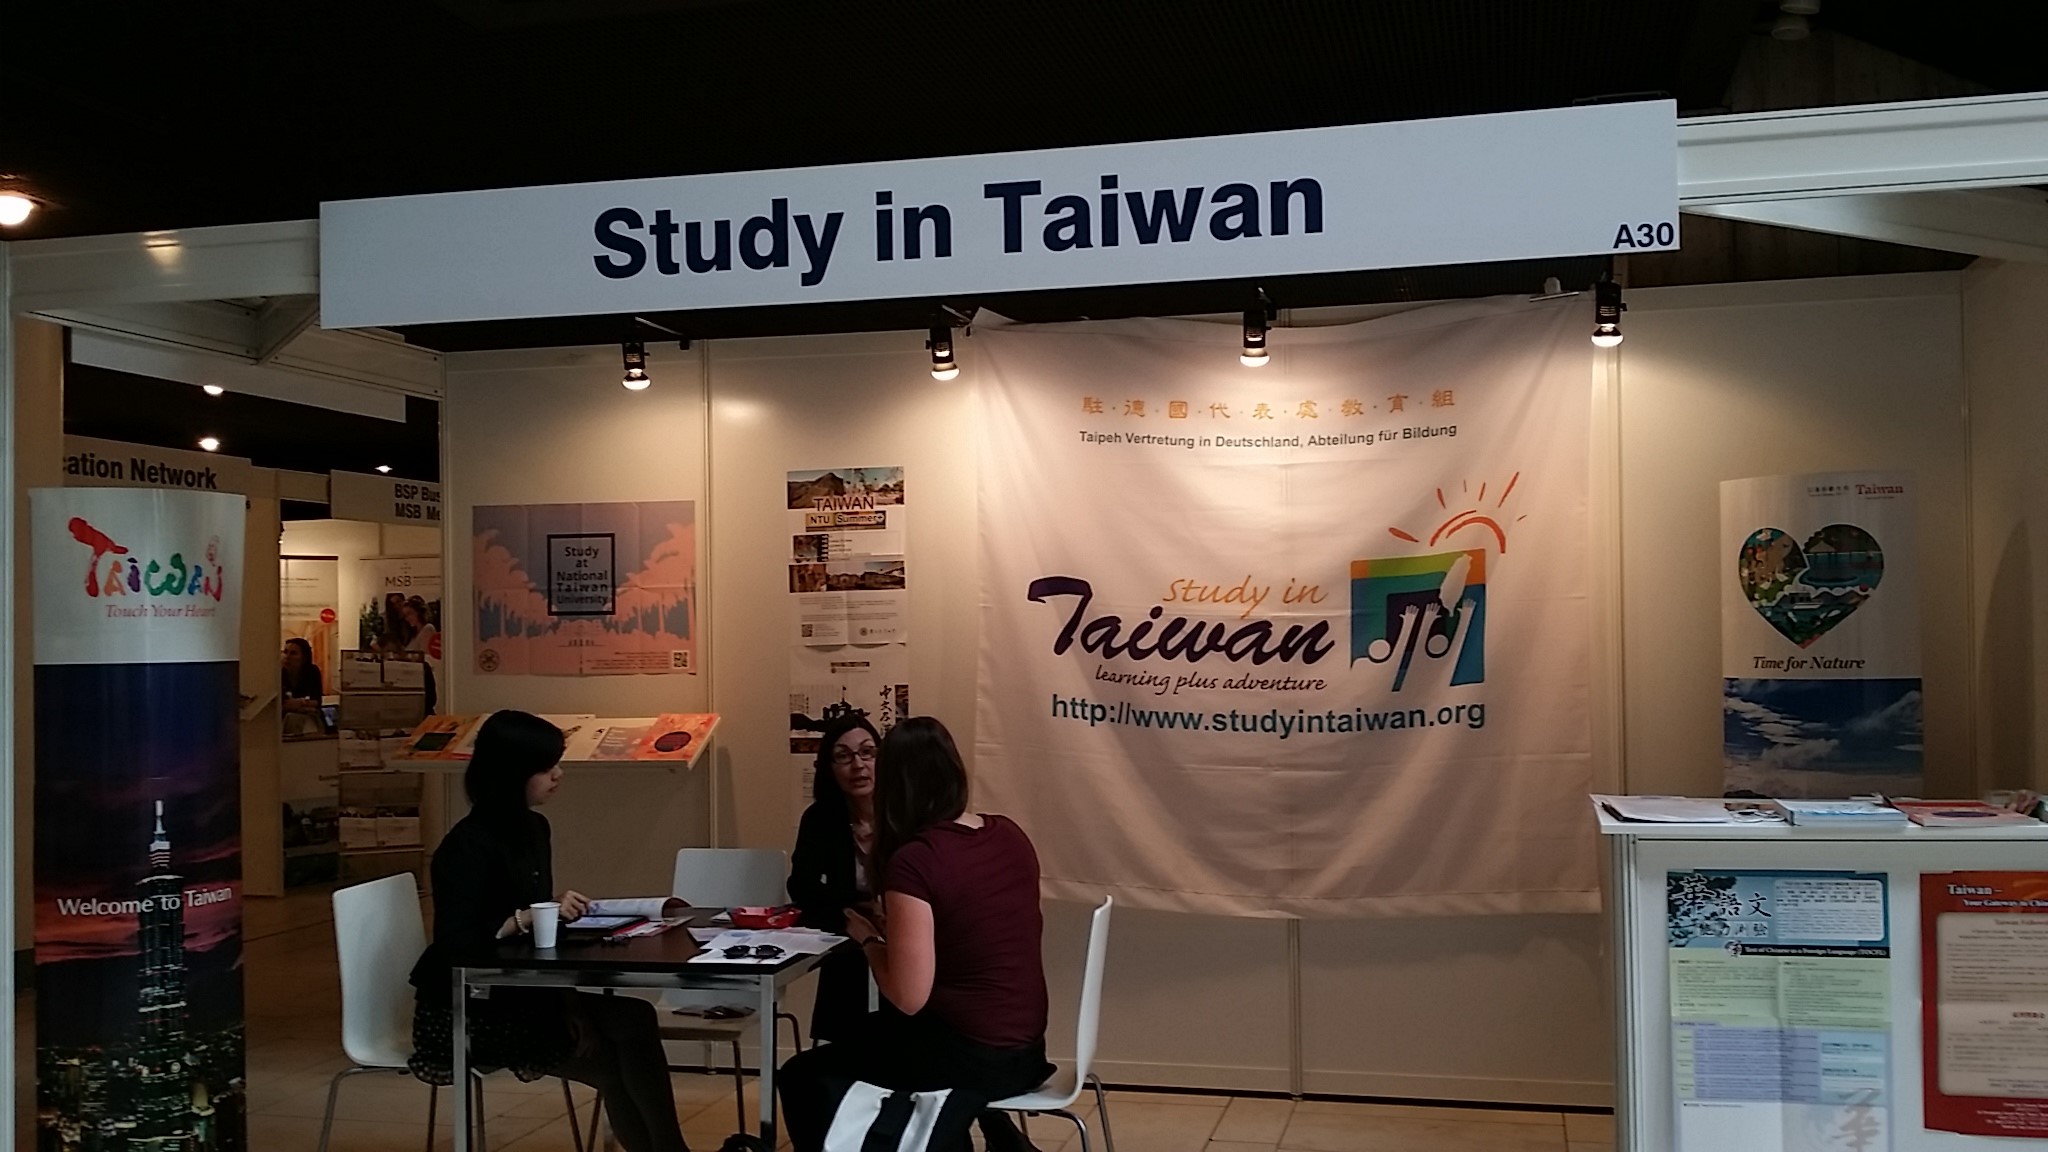 Education Division at the Taipei Representative Office in Germany takes part in the “Studyworld 2017” Higher Education Fair